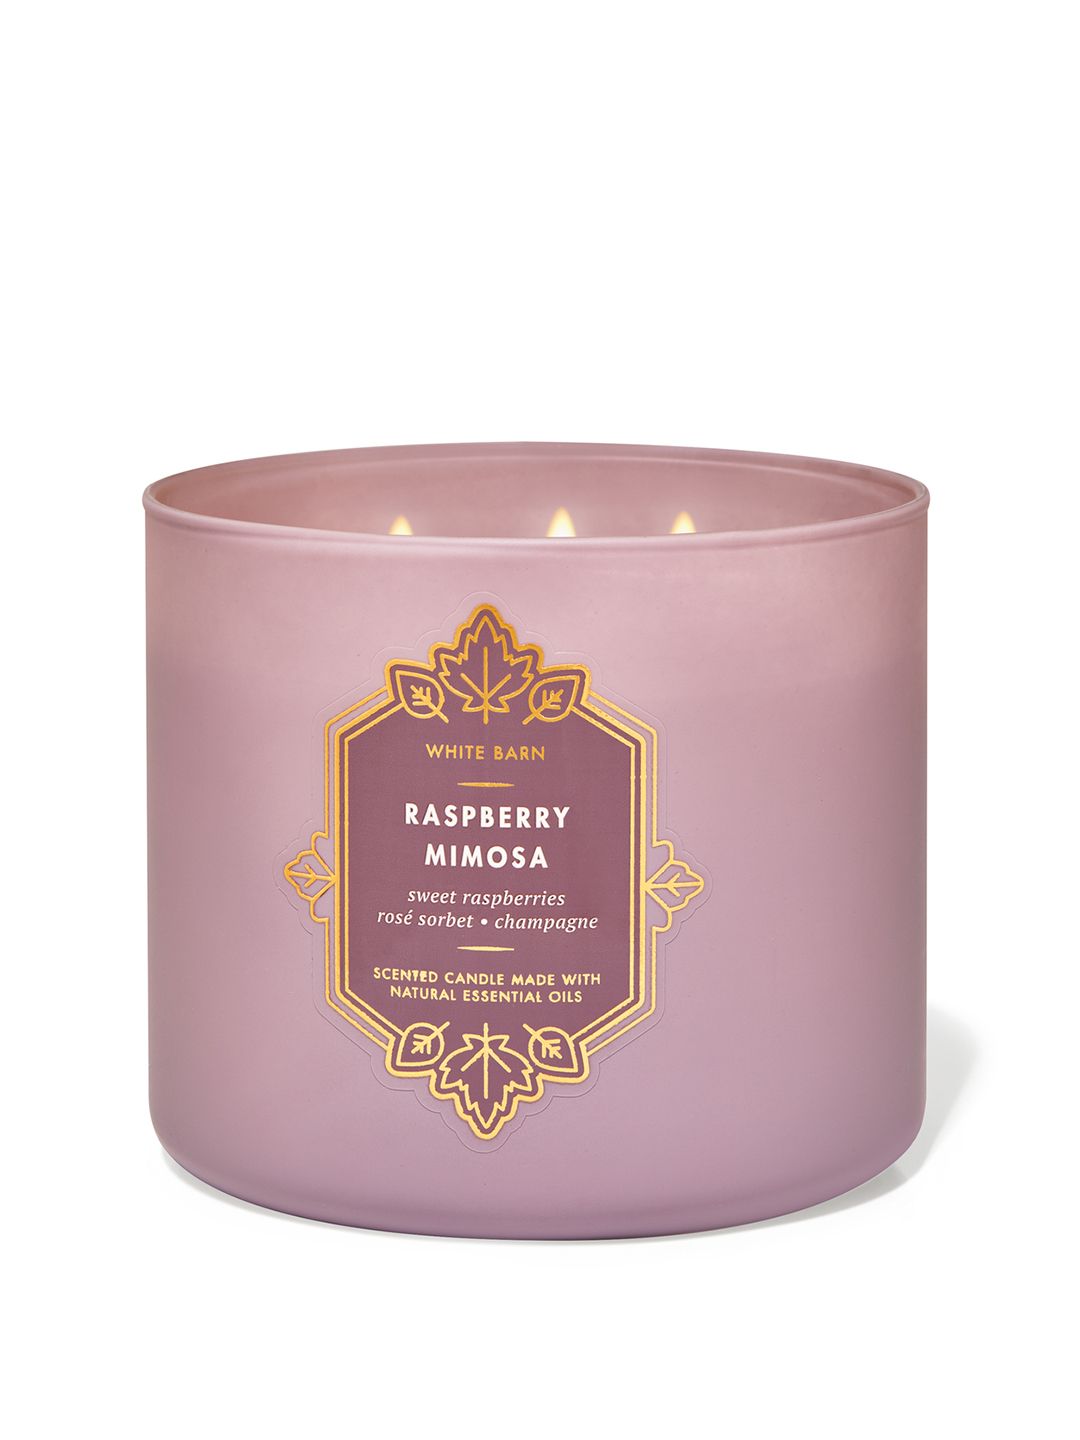 Bath & Body Works Raspberry Mimosa 3-Wick Scented Candle with Essential Oils - 411g Price in India